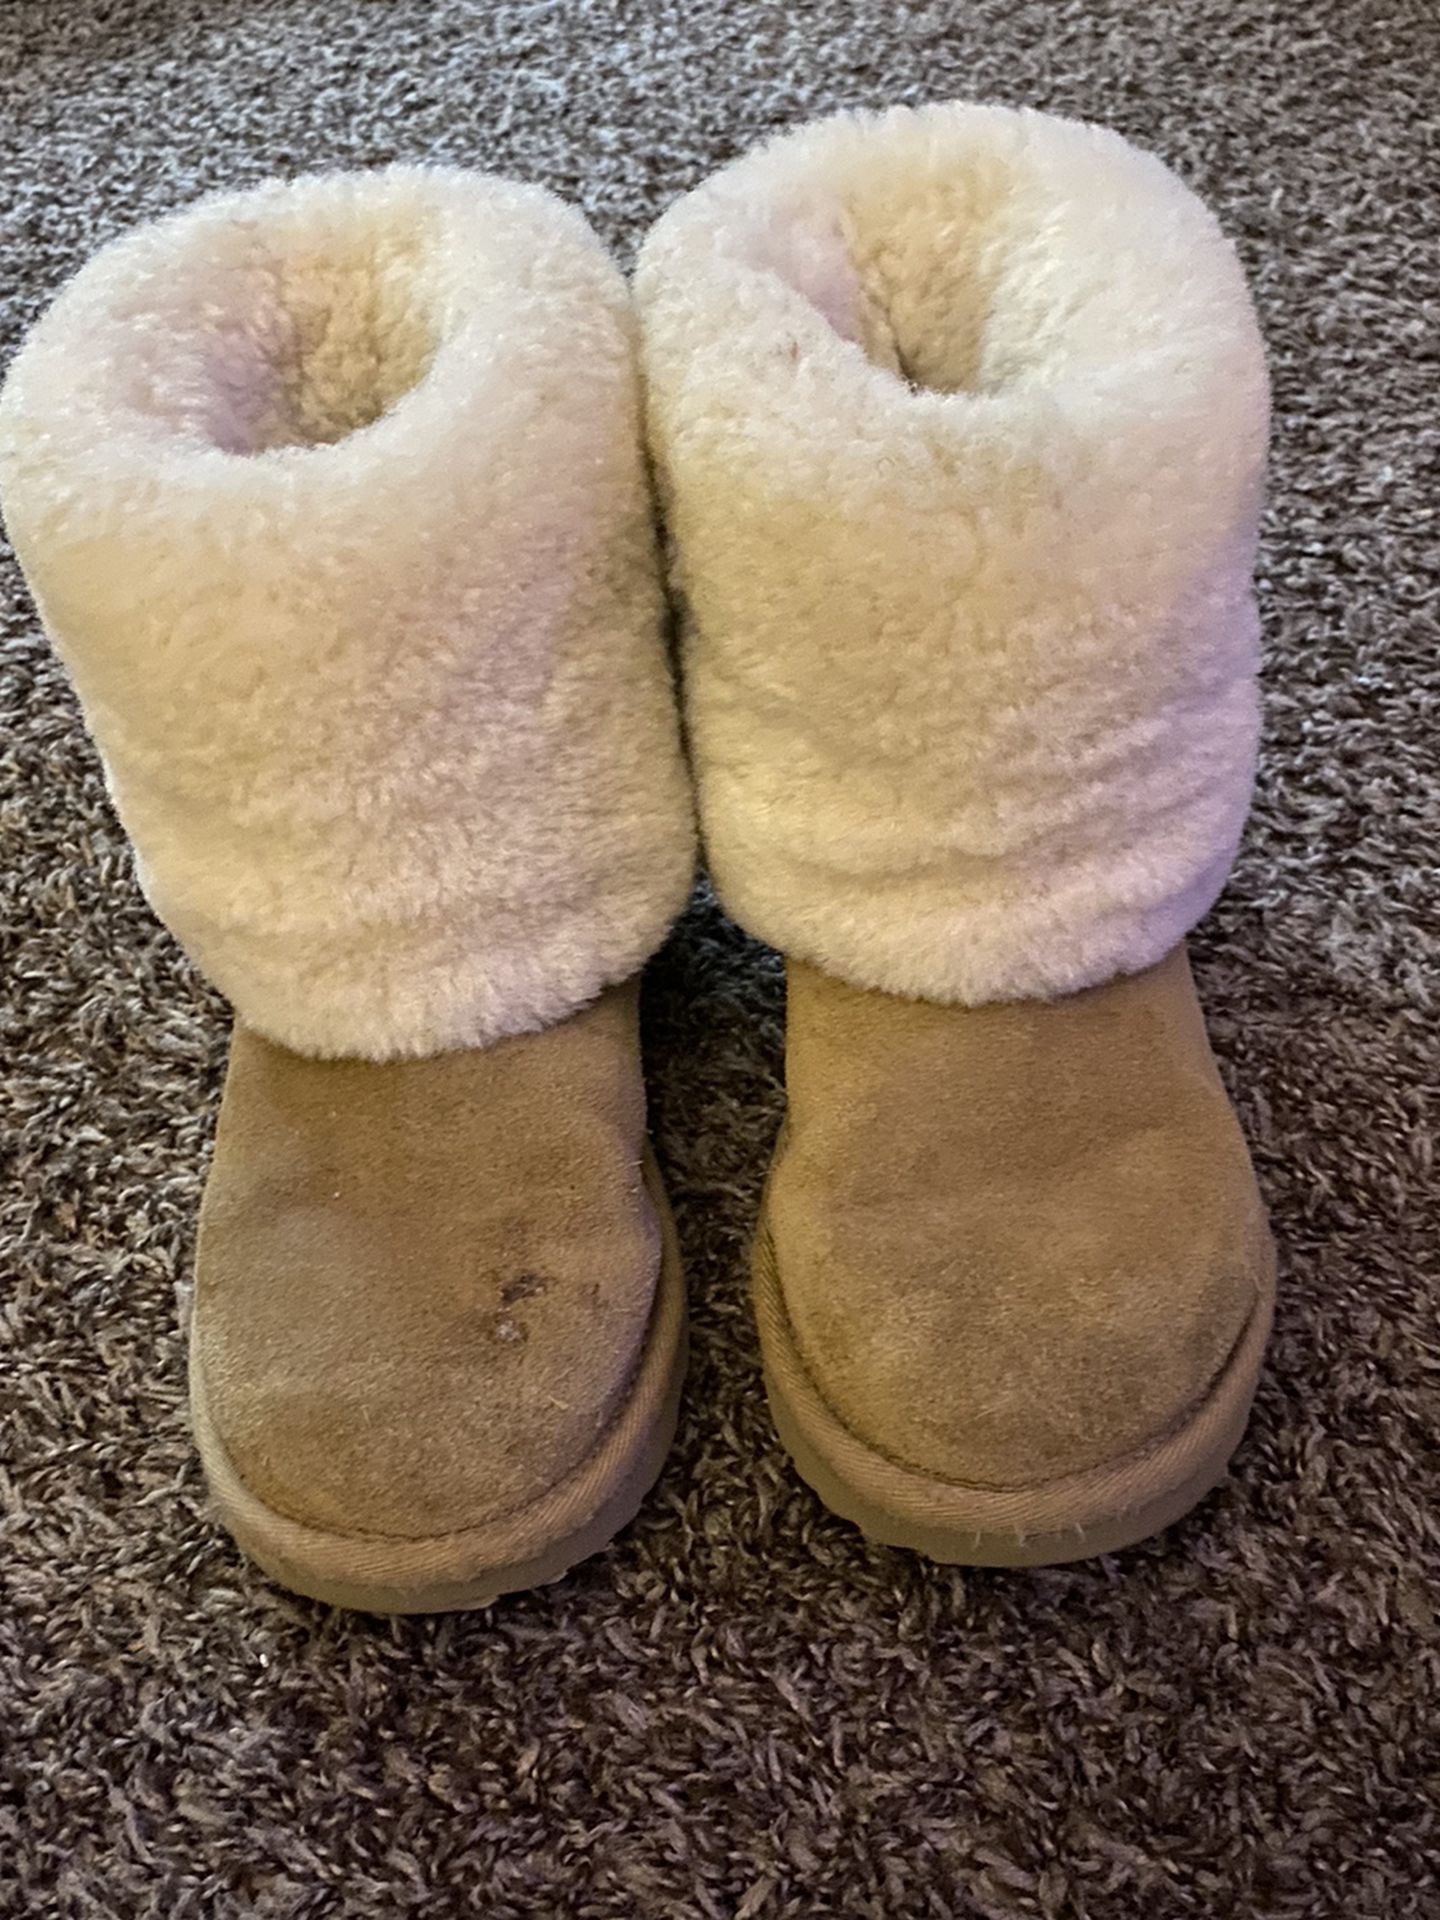 Need To Sell Asap Big Girls Size 3 Fluff Ugg Boots